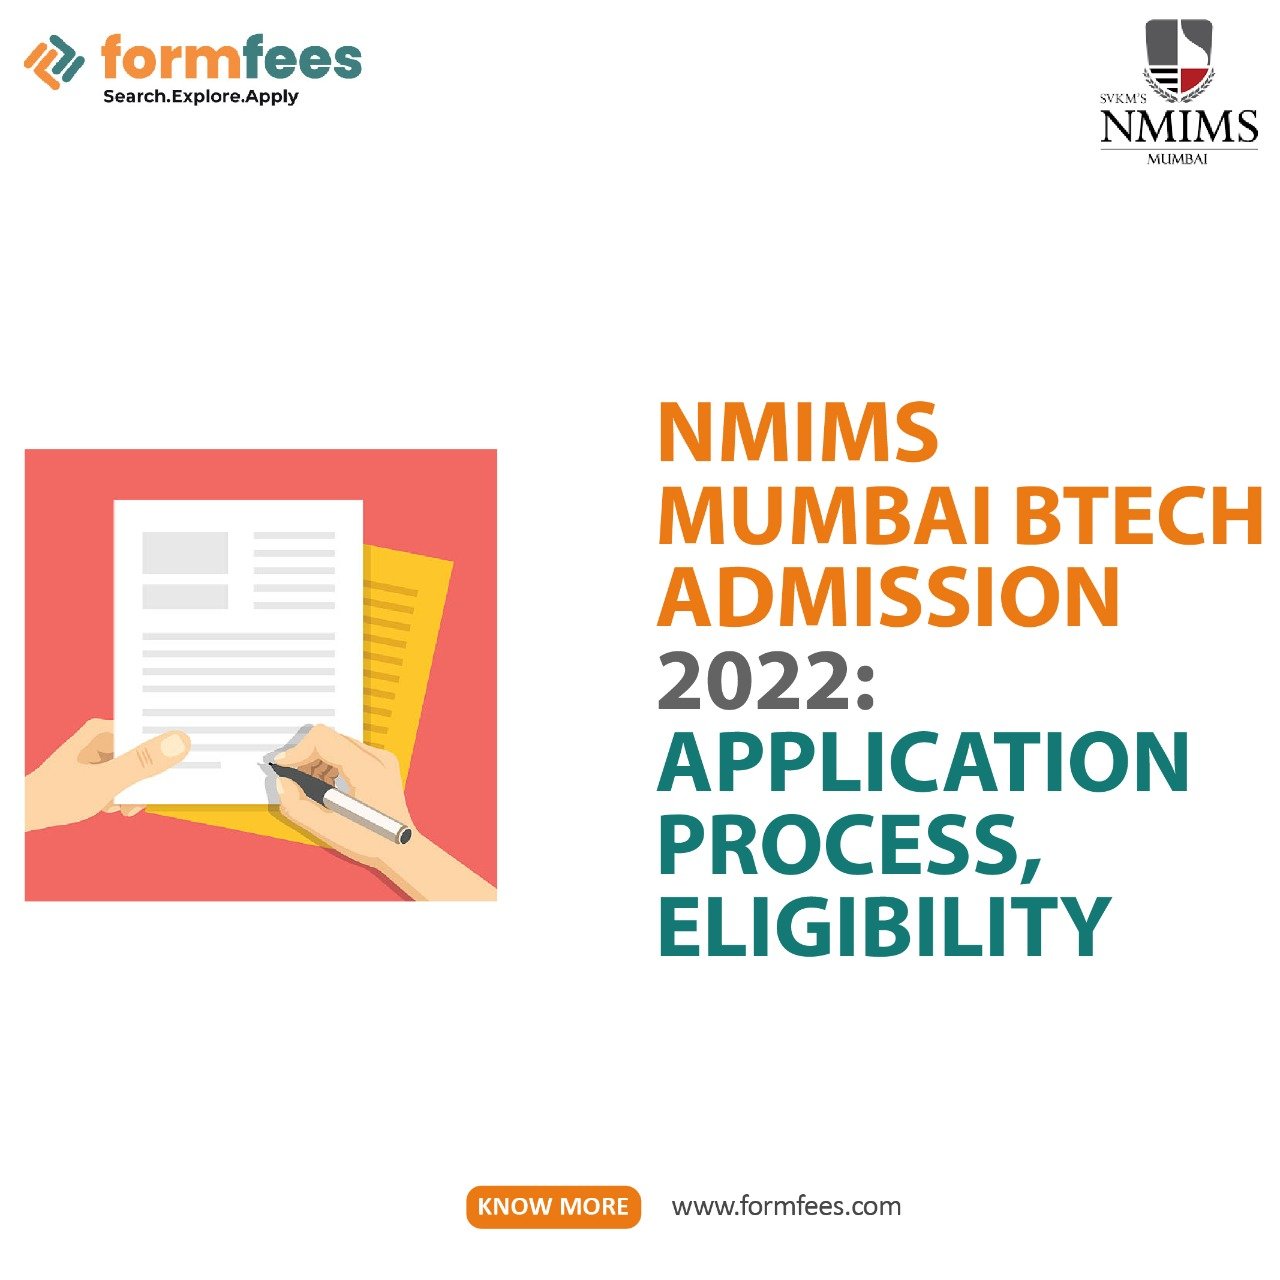 NMIMS Mumbai BTech Admission 2022 Application Process, Eligibility